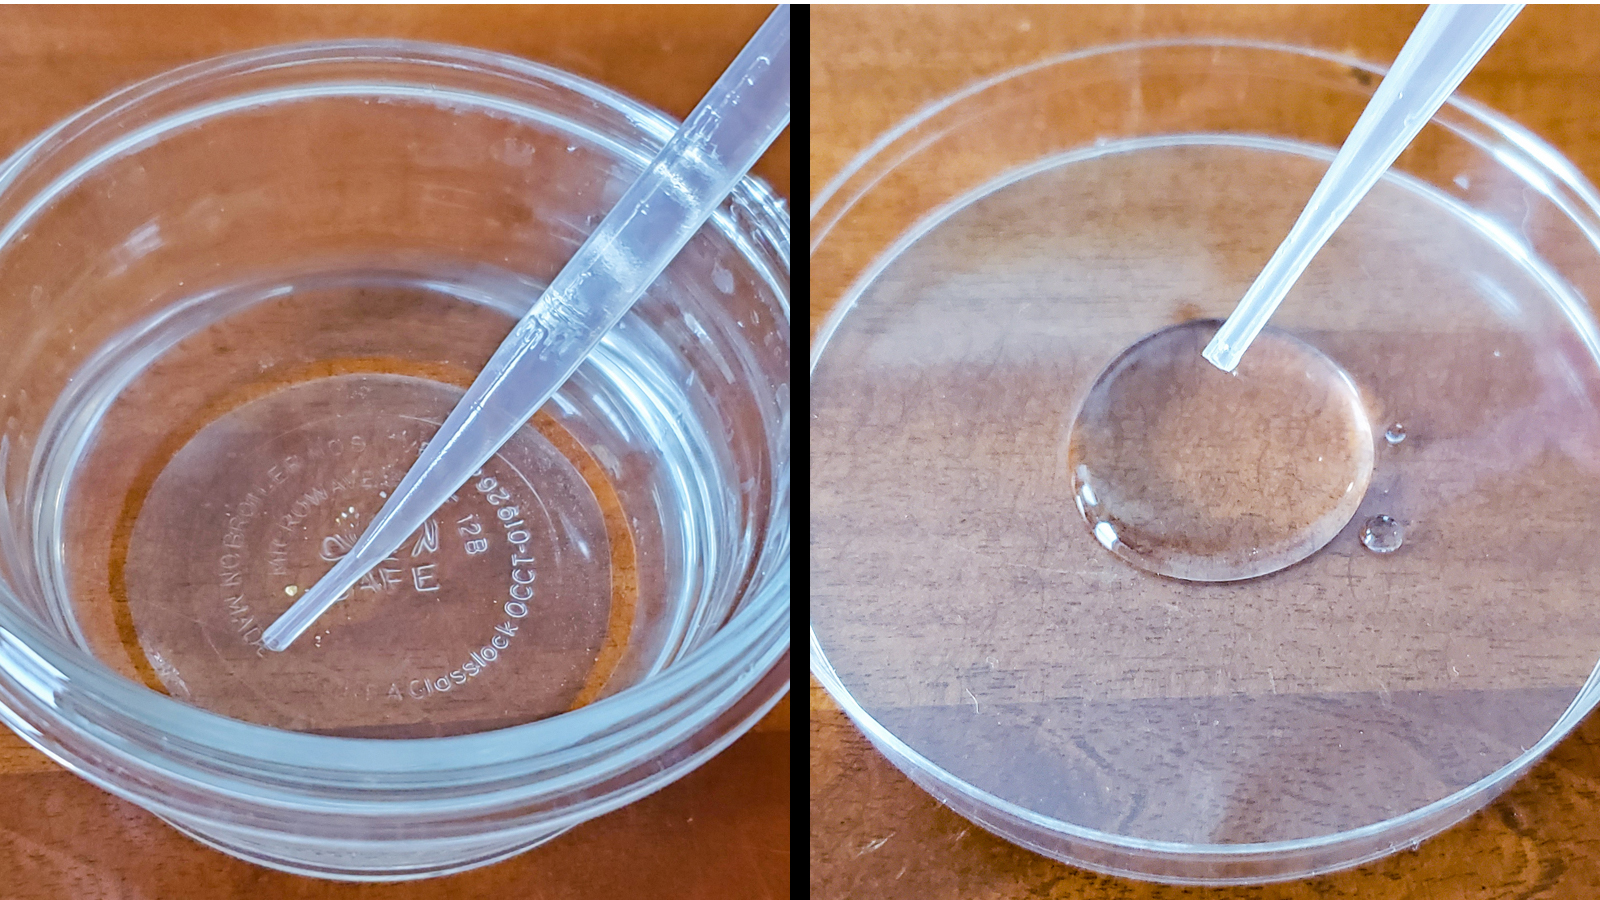 Side-by-side images show a person using a pipette to remove some of the salt solution and putting it in a Petri dish.